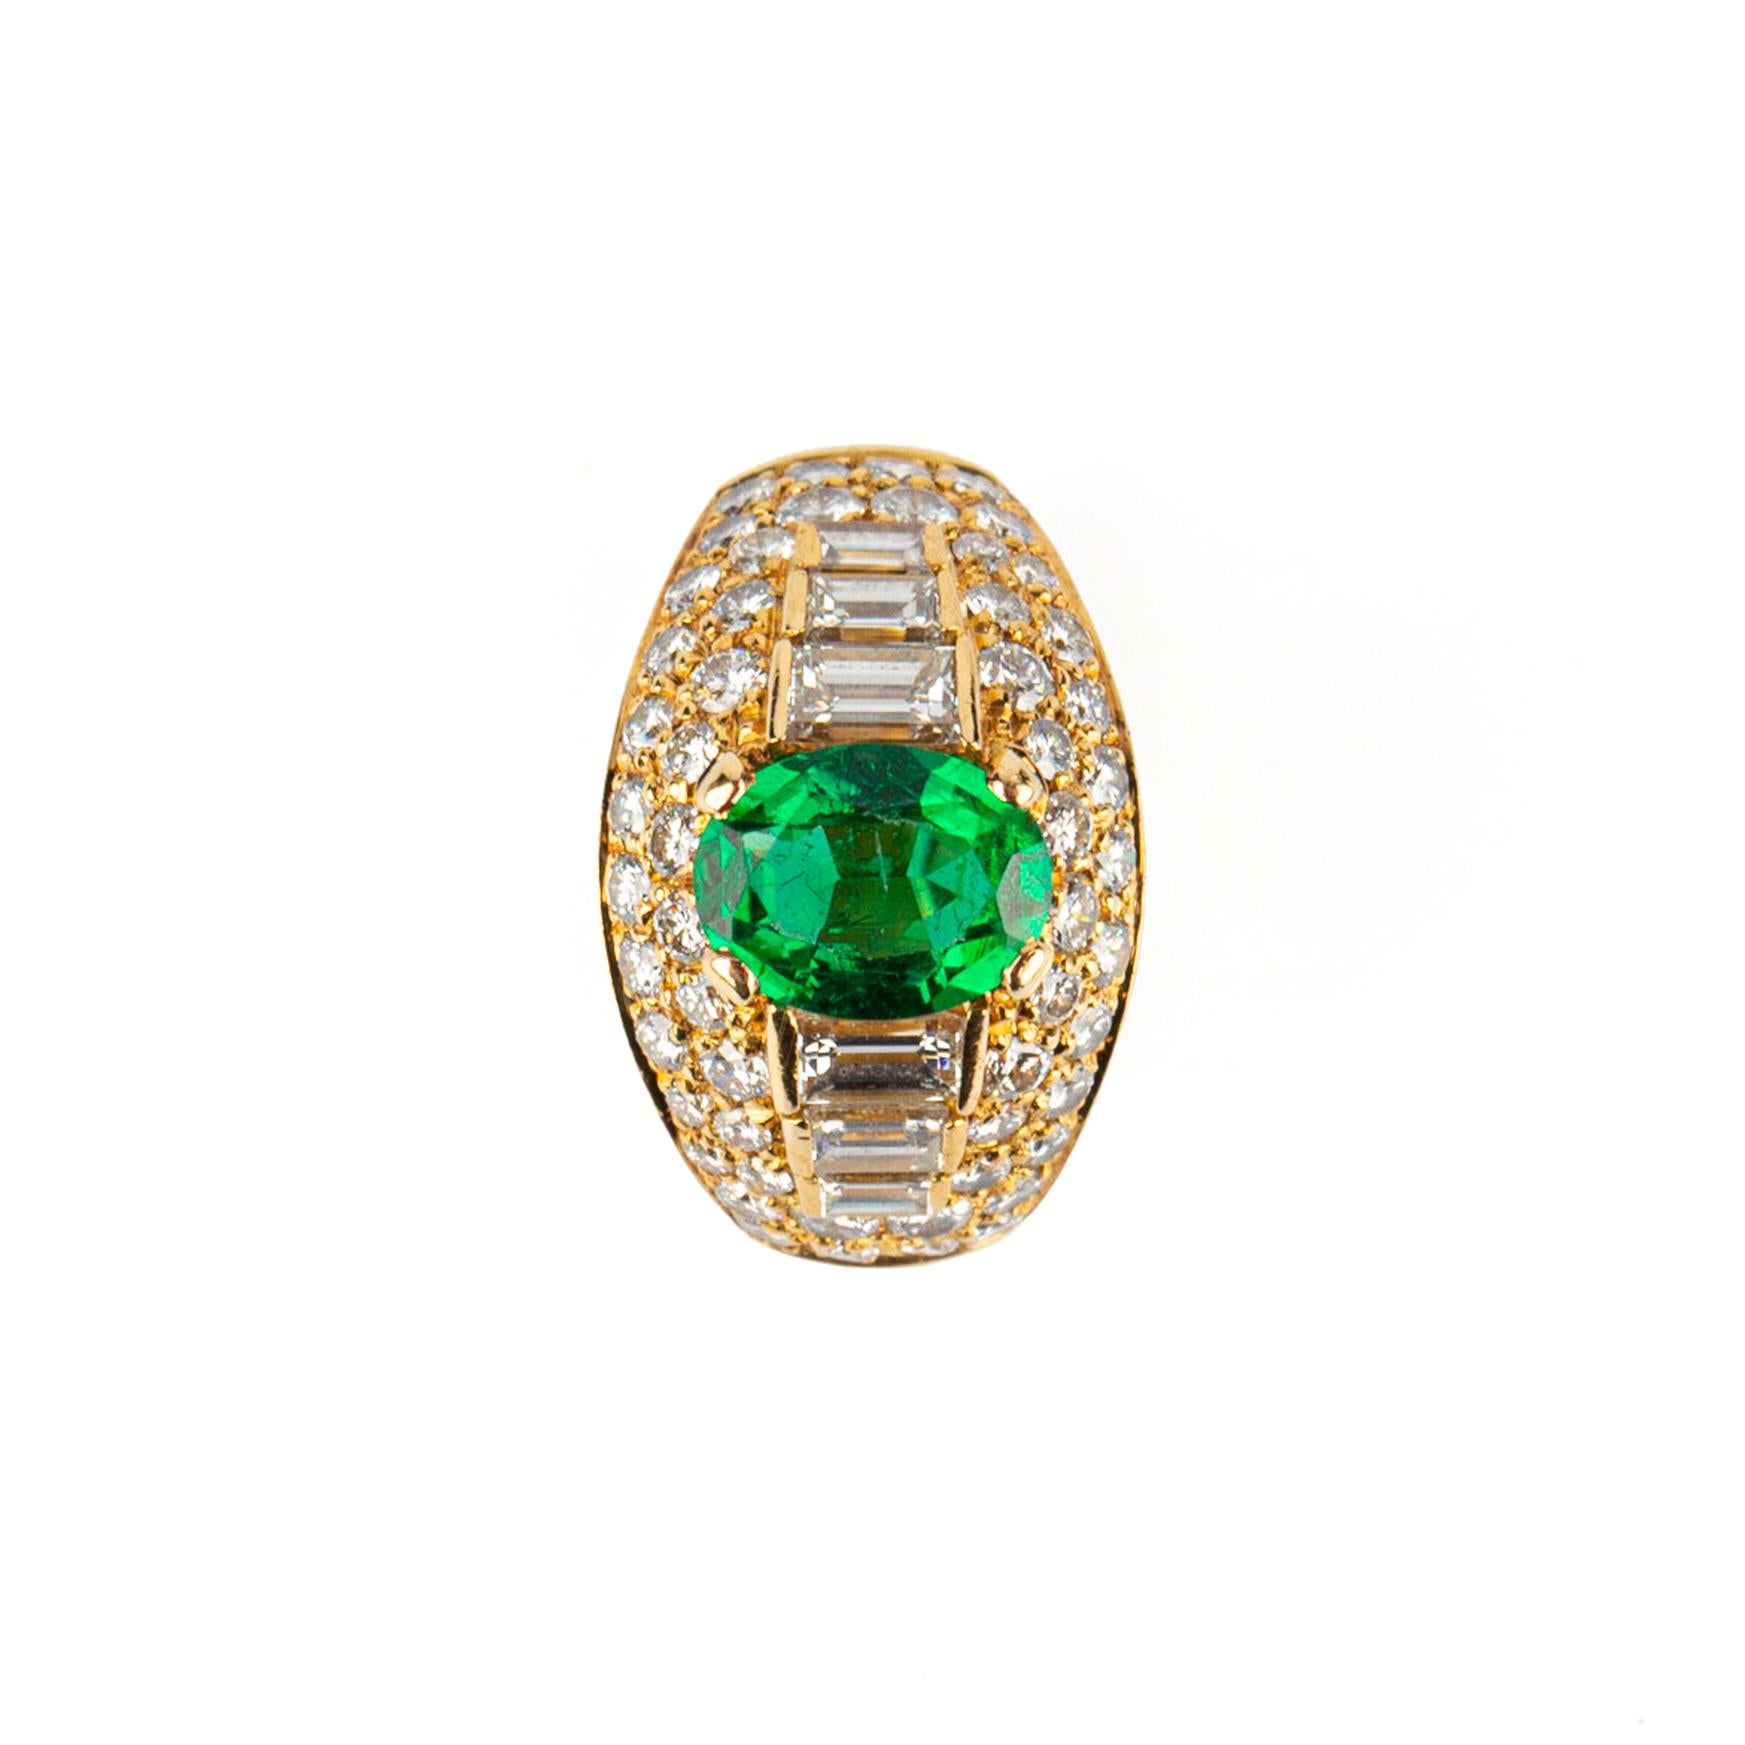 A Bulgari Emerald (1.3 cts) and Diamond Trombino Ring in 18k Yellow Gold. Made in Italy, circa 1975. 

Ring size 5

10.2 grams 
App CTW: 2.11
Emerald: 8.76 x 6.71 x 3.69 - 1.30 carats 